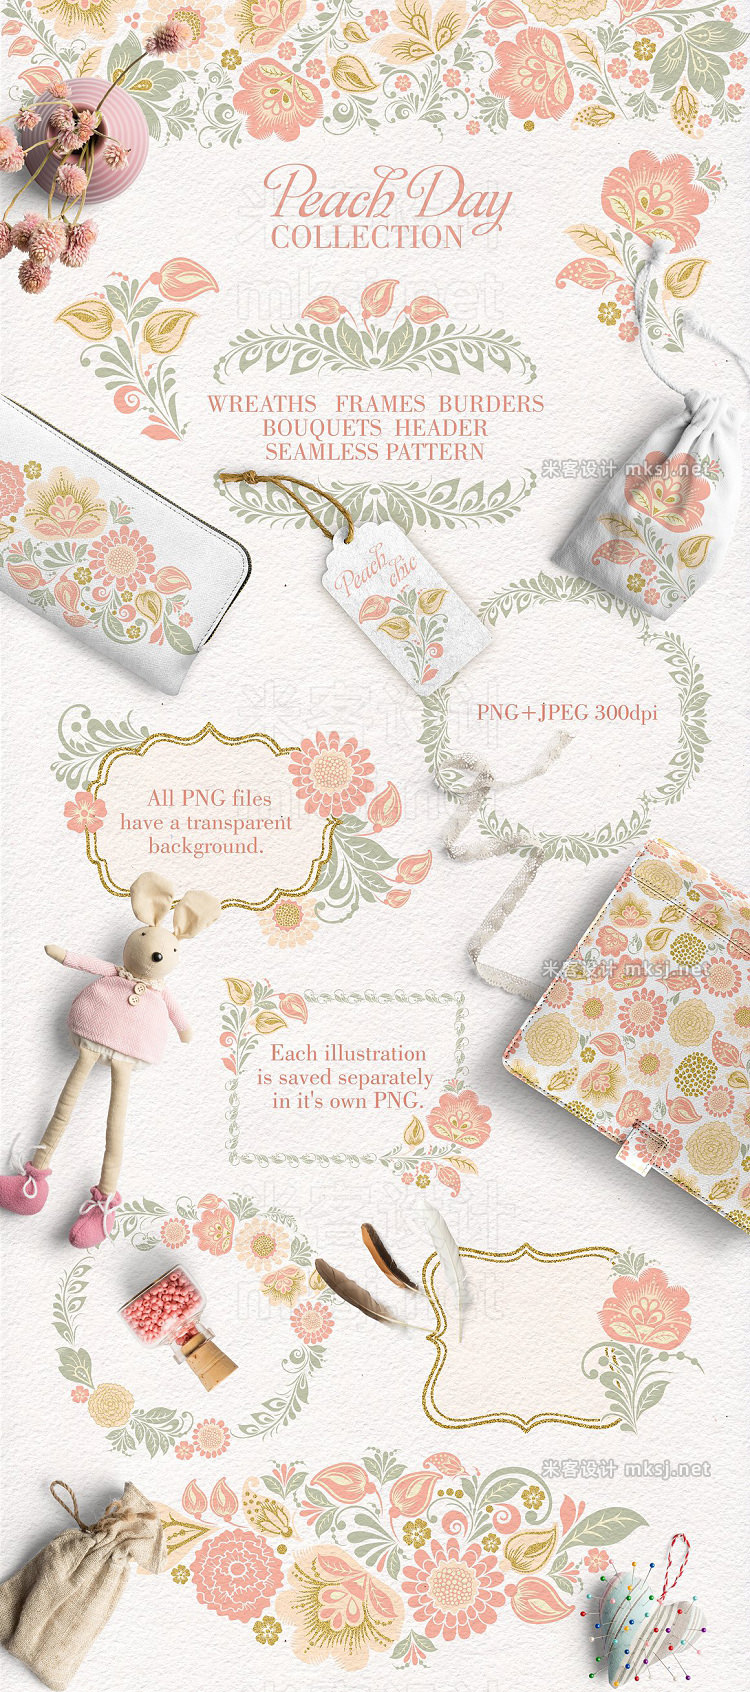 png素材 Peach Day glitter floral collection